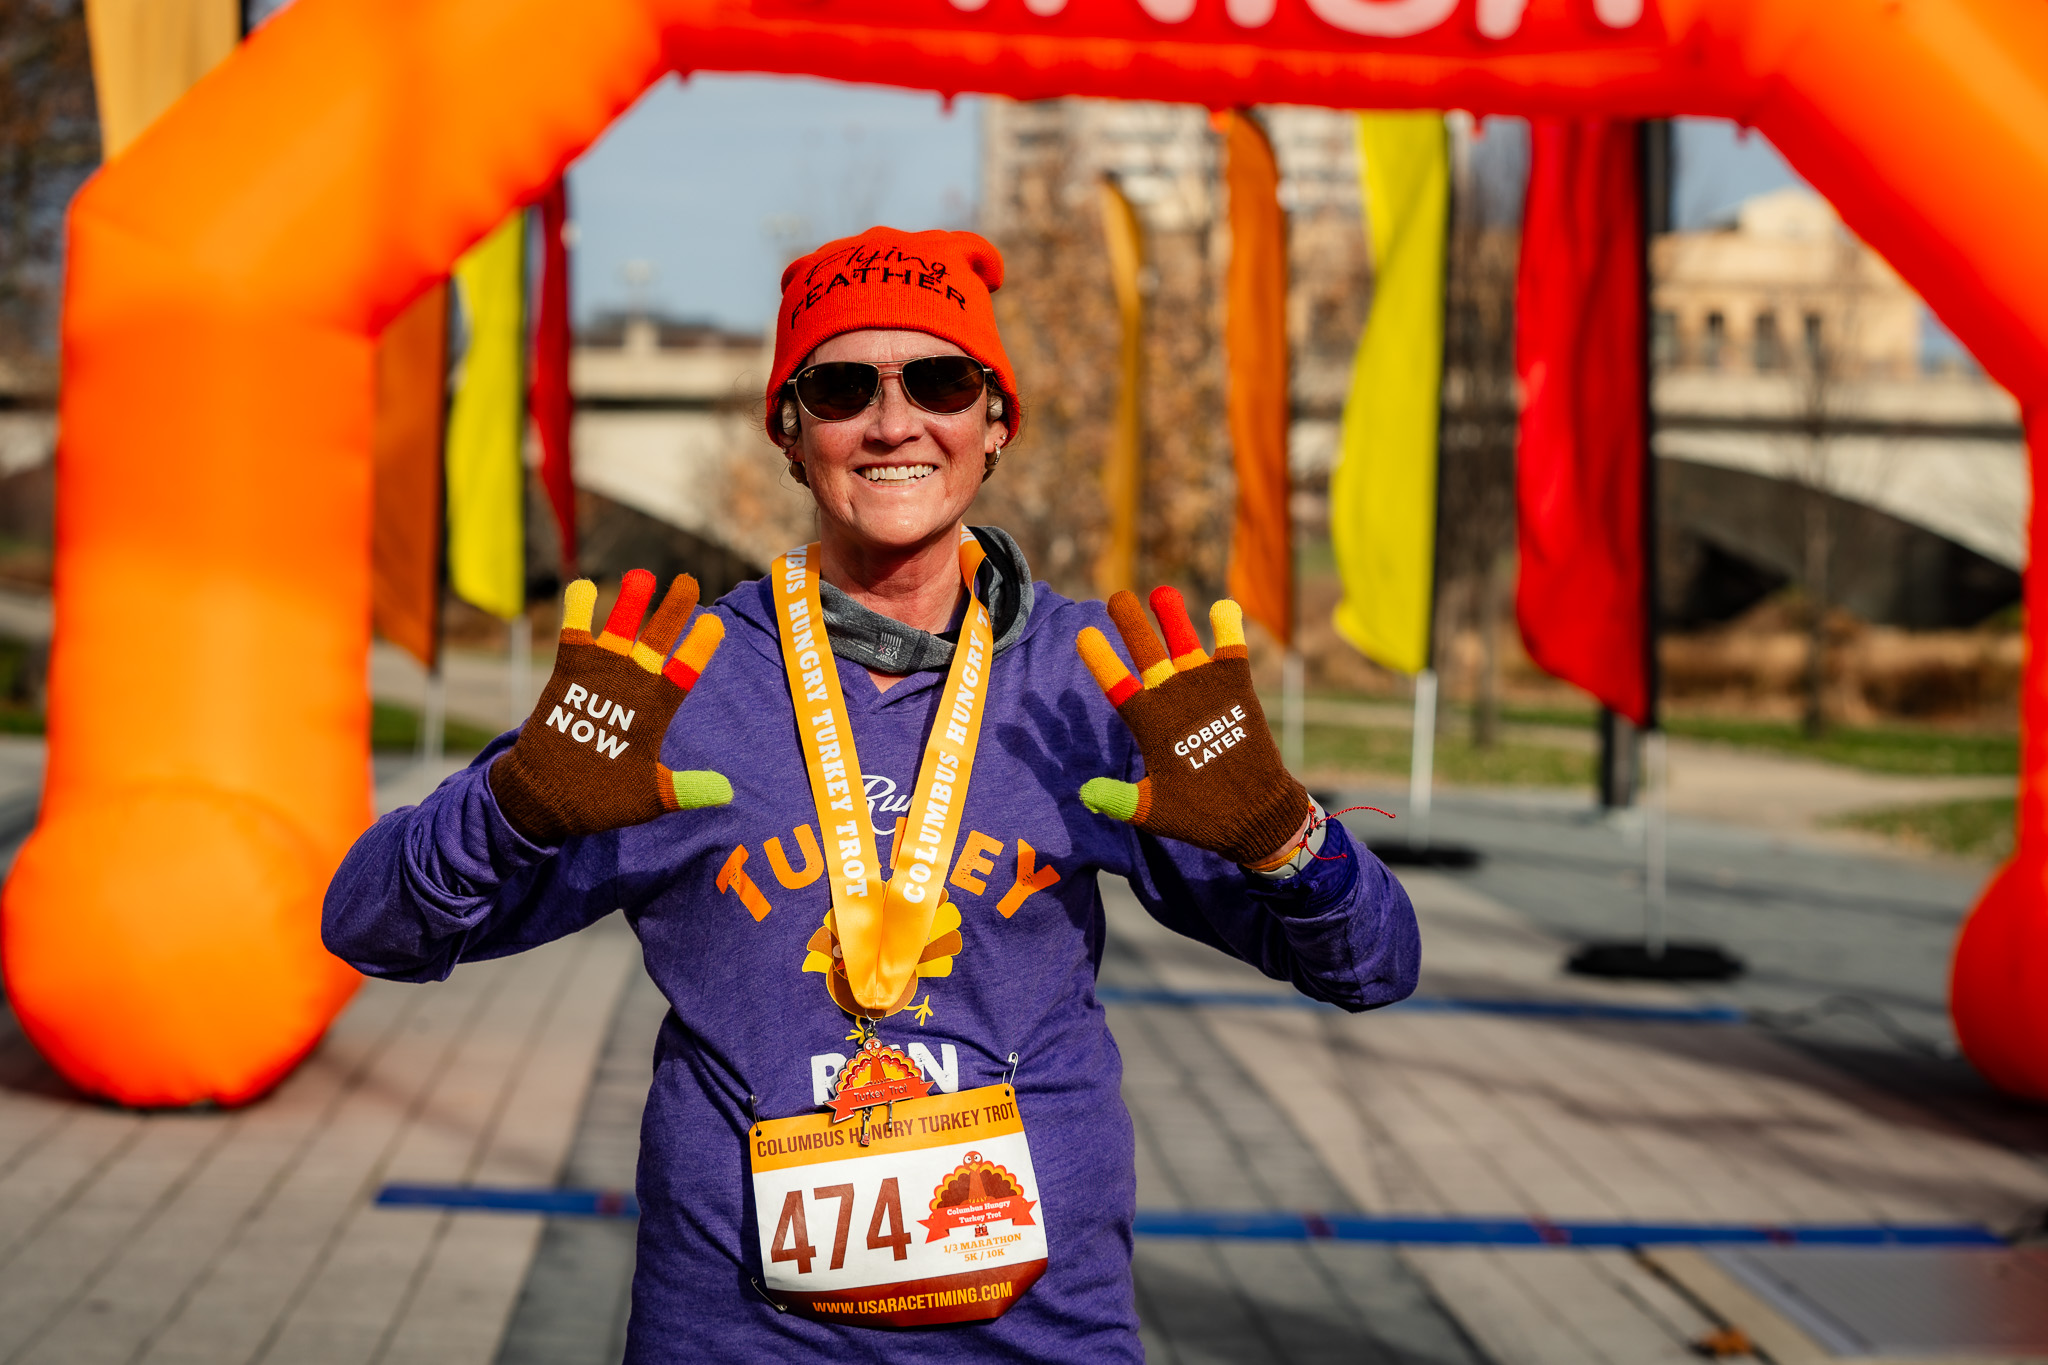 Turkey Trot Finisher - Columbus Hungry Turkey Trot - Columbus Turkey Trot - USA Race Timing & Event Management - LeVeque Tower - Downtown Columbus, Ohio - Feather Flags - Start Line - Finish Line - COSI - Genoa Park - Columbus 5k - Columbus 10k - Columbus 1/3 Marathon - Columbus Half Marathon - Columbus Marathon